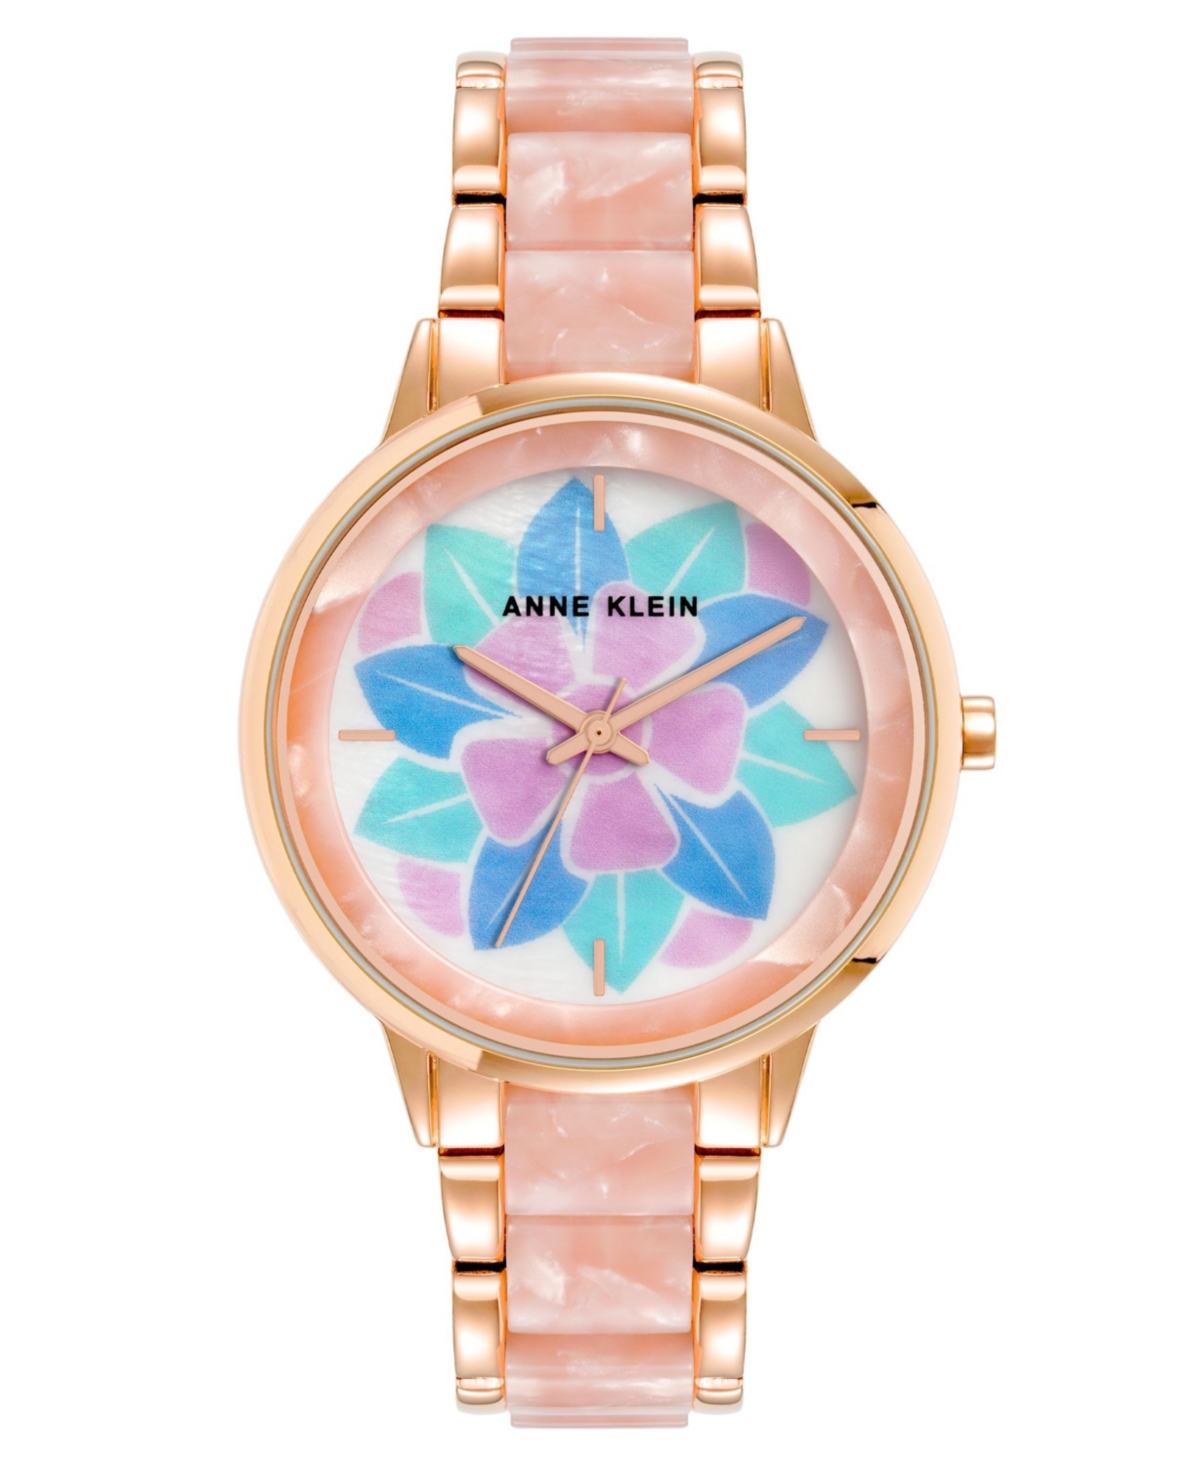 Anne Klein Women's Three-hand Quartz Rose Gold-tone Alloy With Pink Resin Bracelet Watch, 37mm In Rose Gold-tone,pink